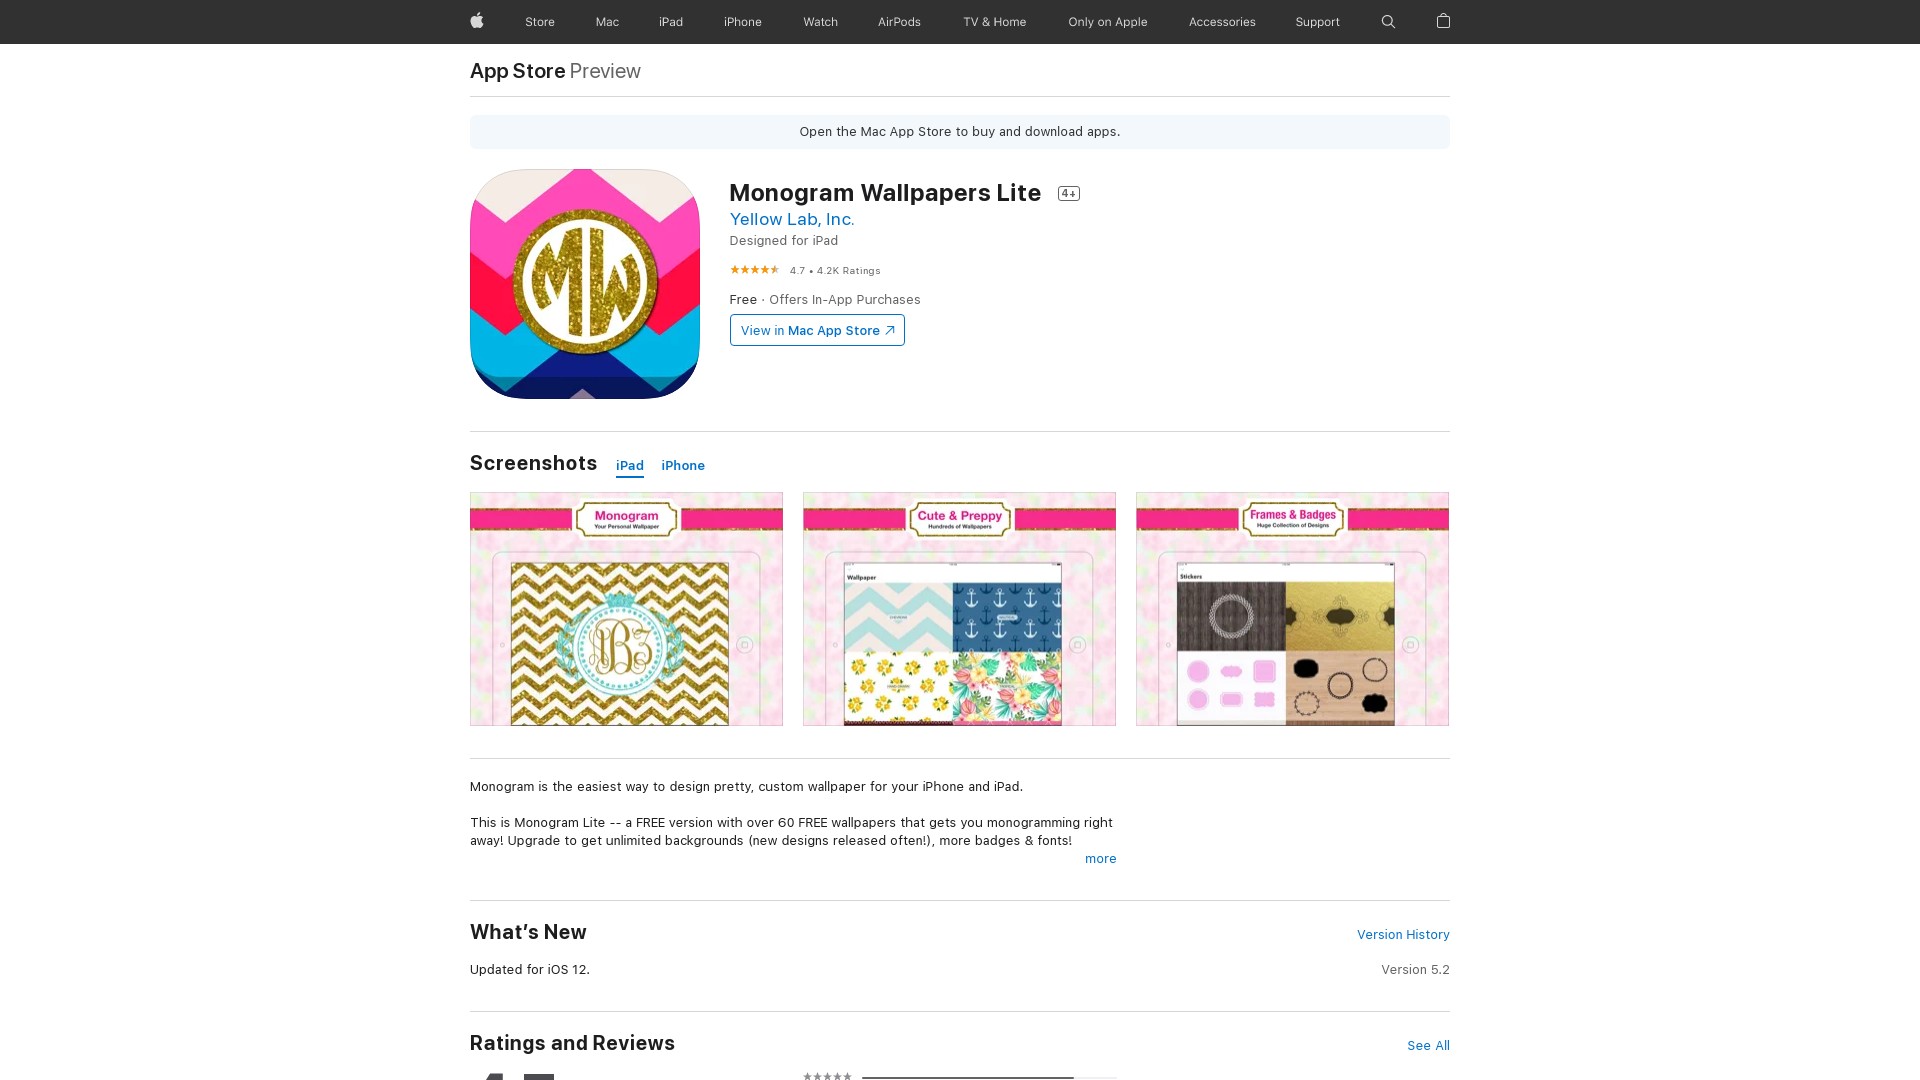 Monogram is the easiest way to design pretty, custom wallpaper for your iPhone and iPad. This is Monogram Lite.